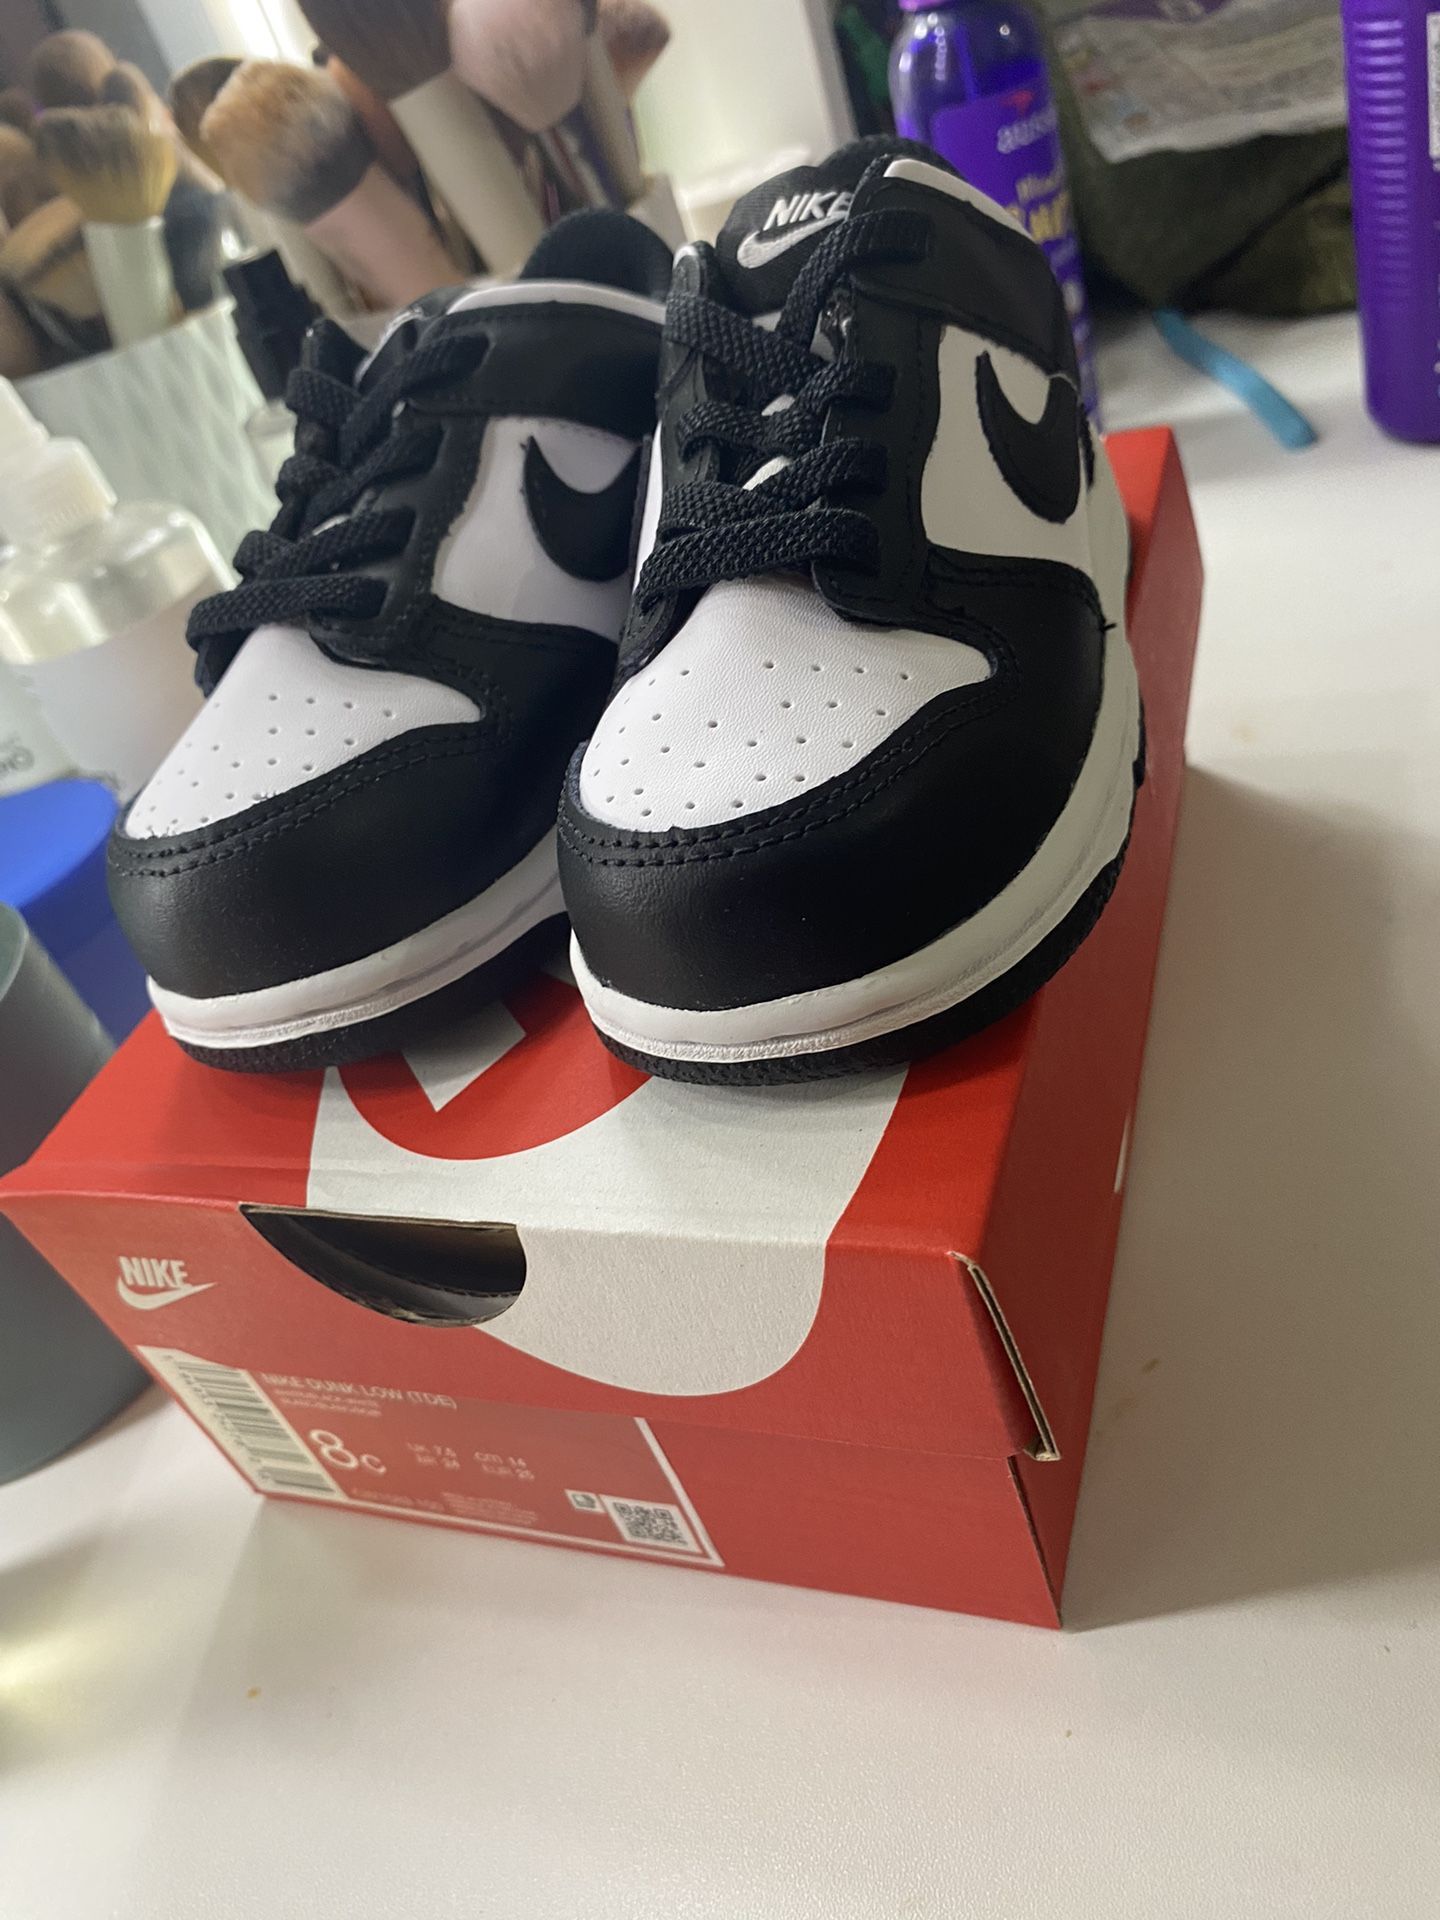 Nike Dunk Low Panda All Toddler Sizes Available!